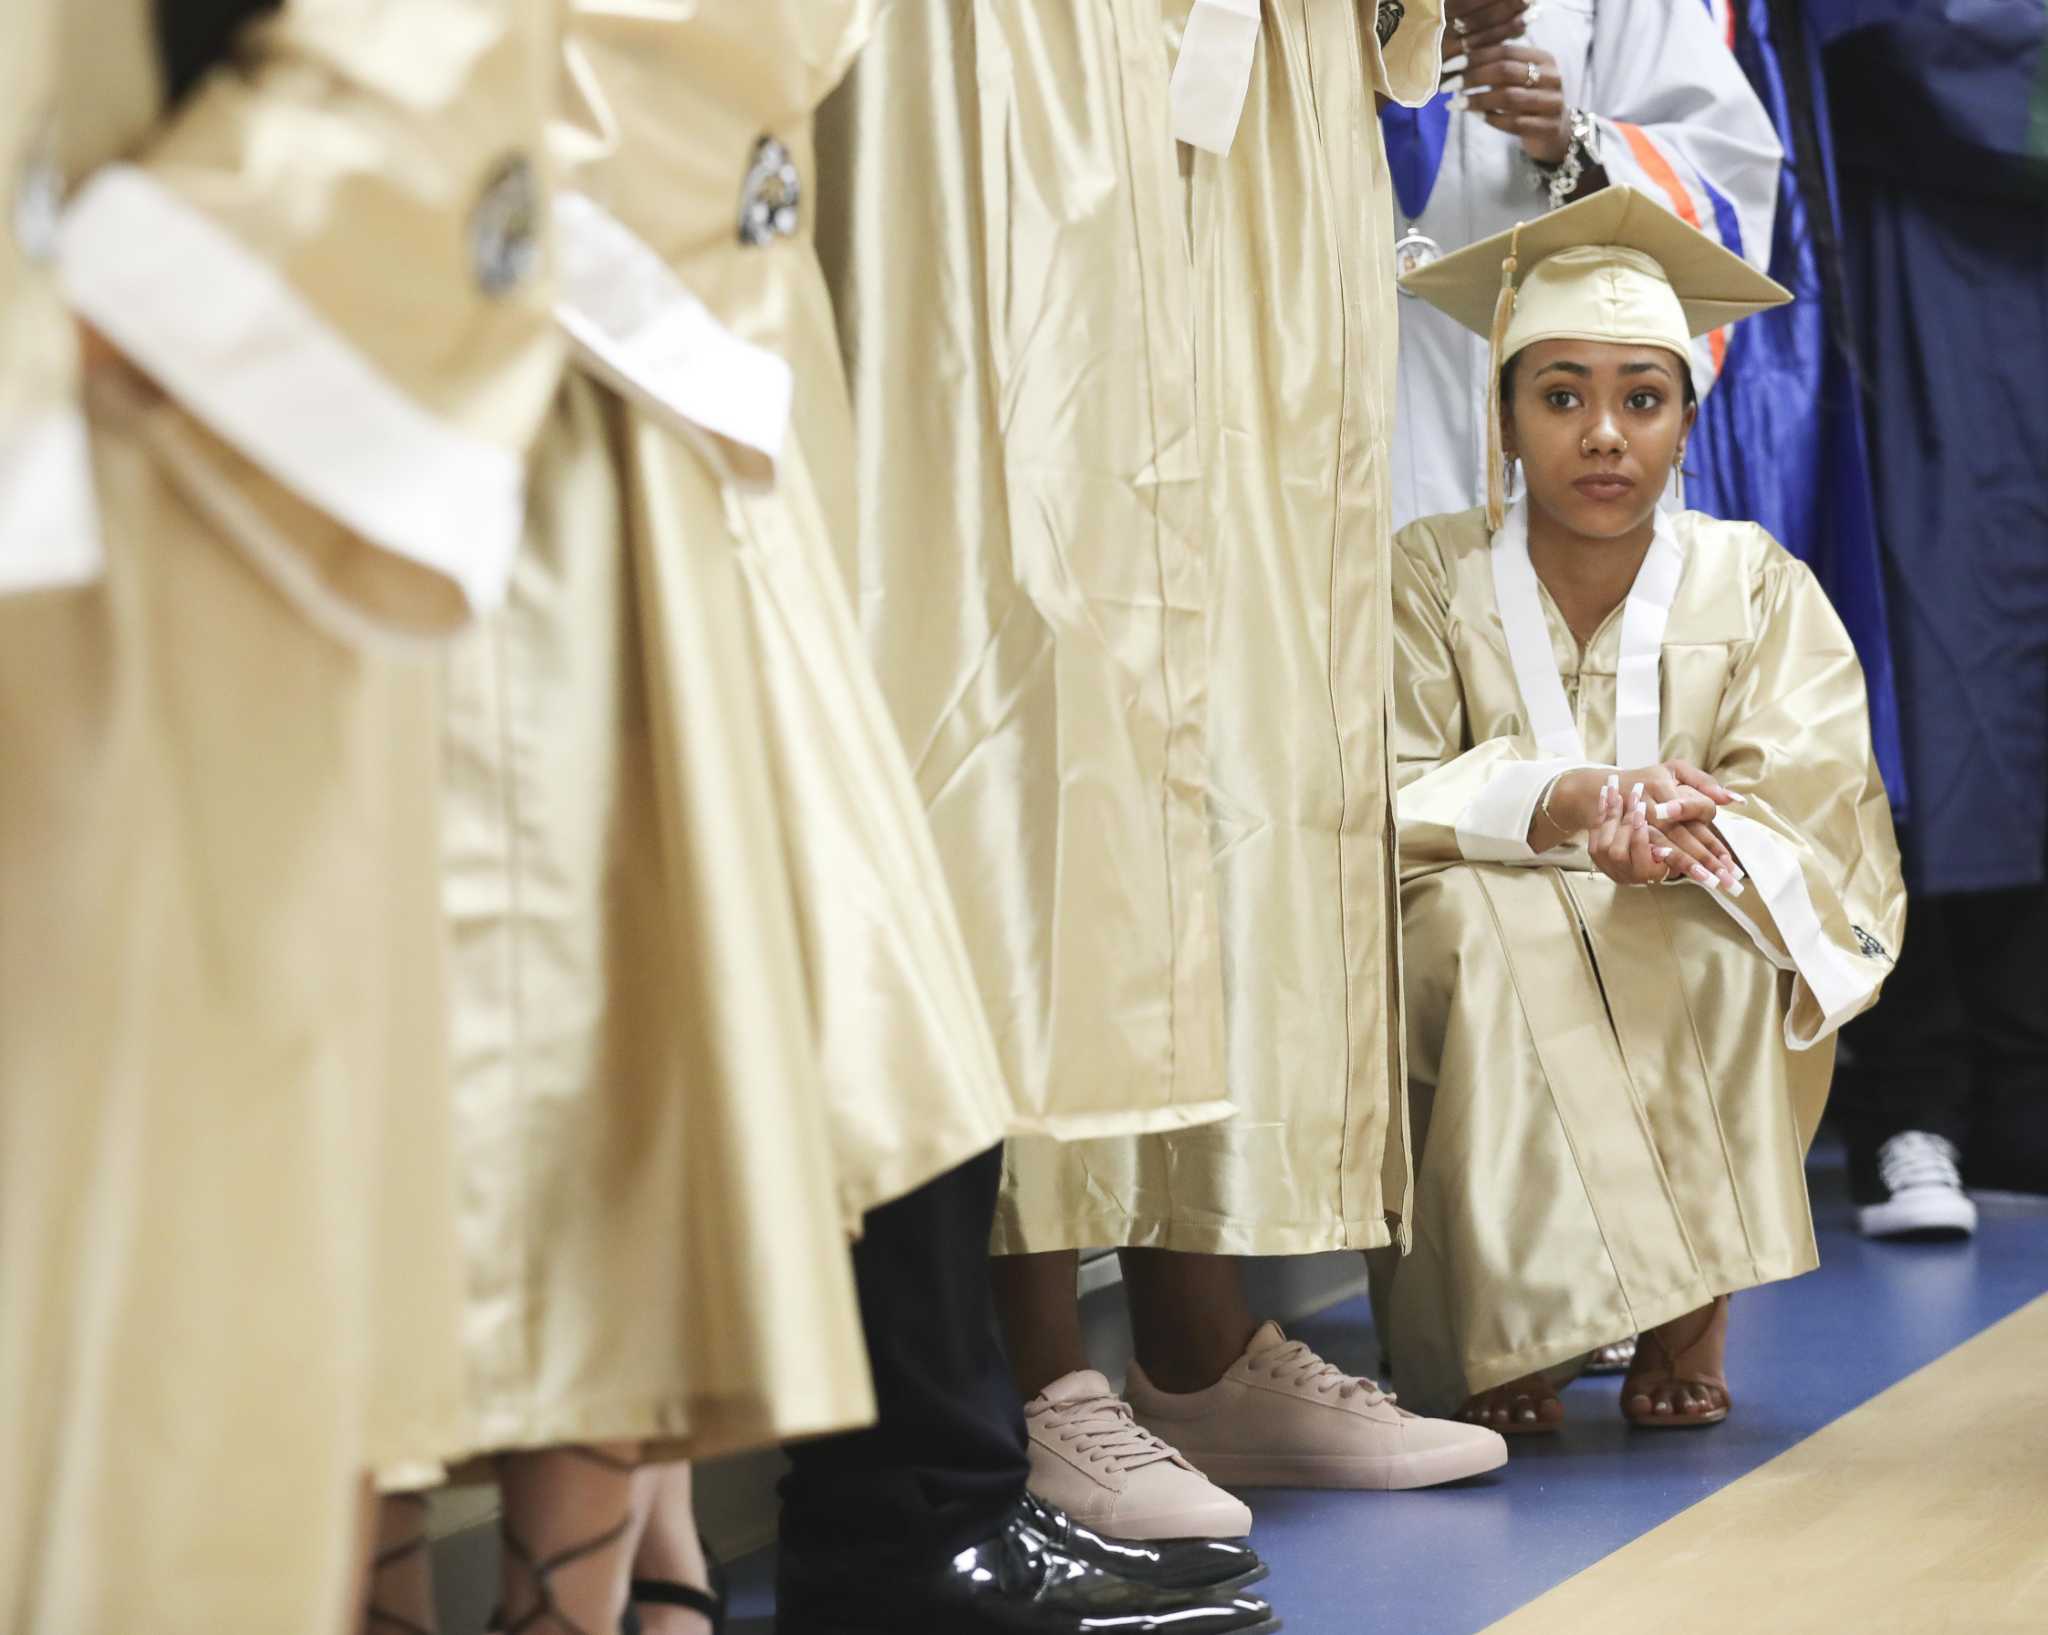 Conroe ISD summer graduates say the key to success is powering through